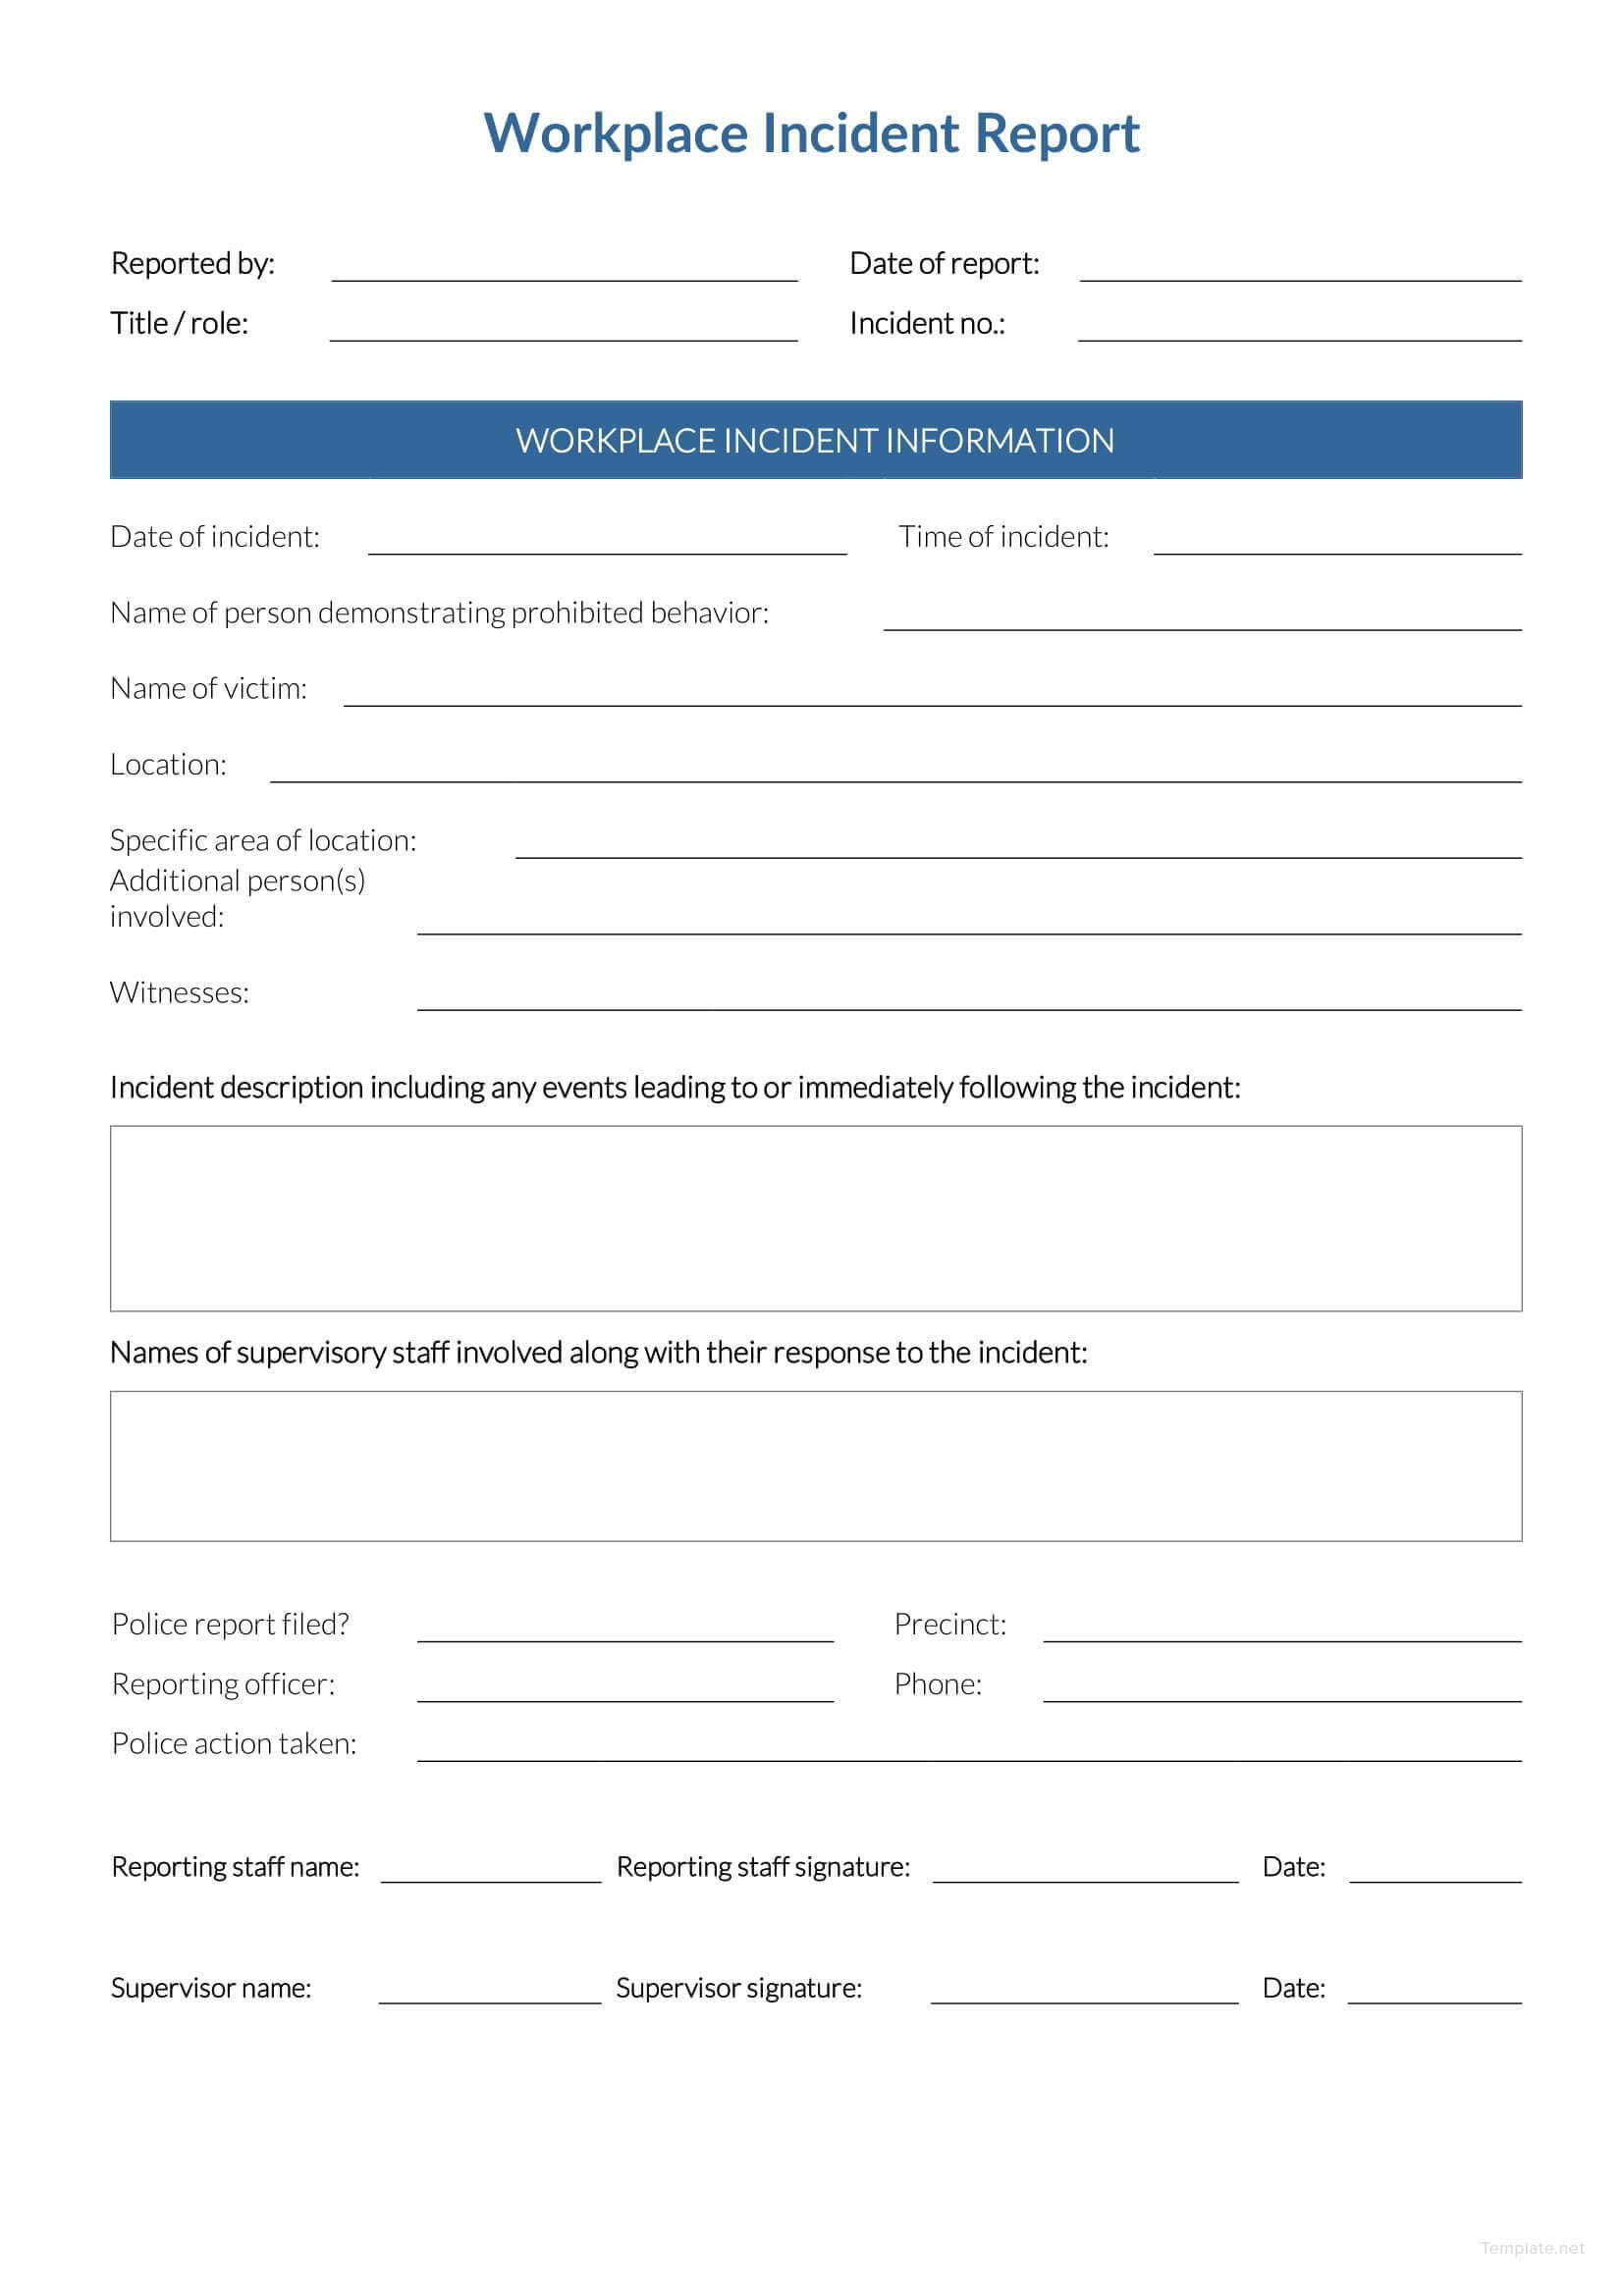 Free Workplace Incident Report | Incident Report, Report With Incident Report Form Template Doc